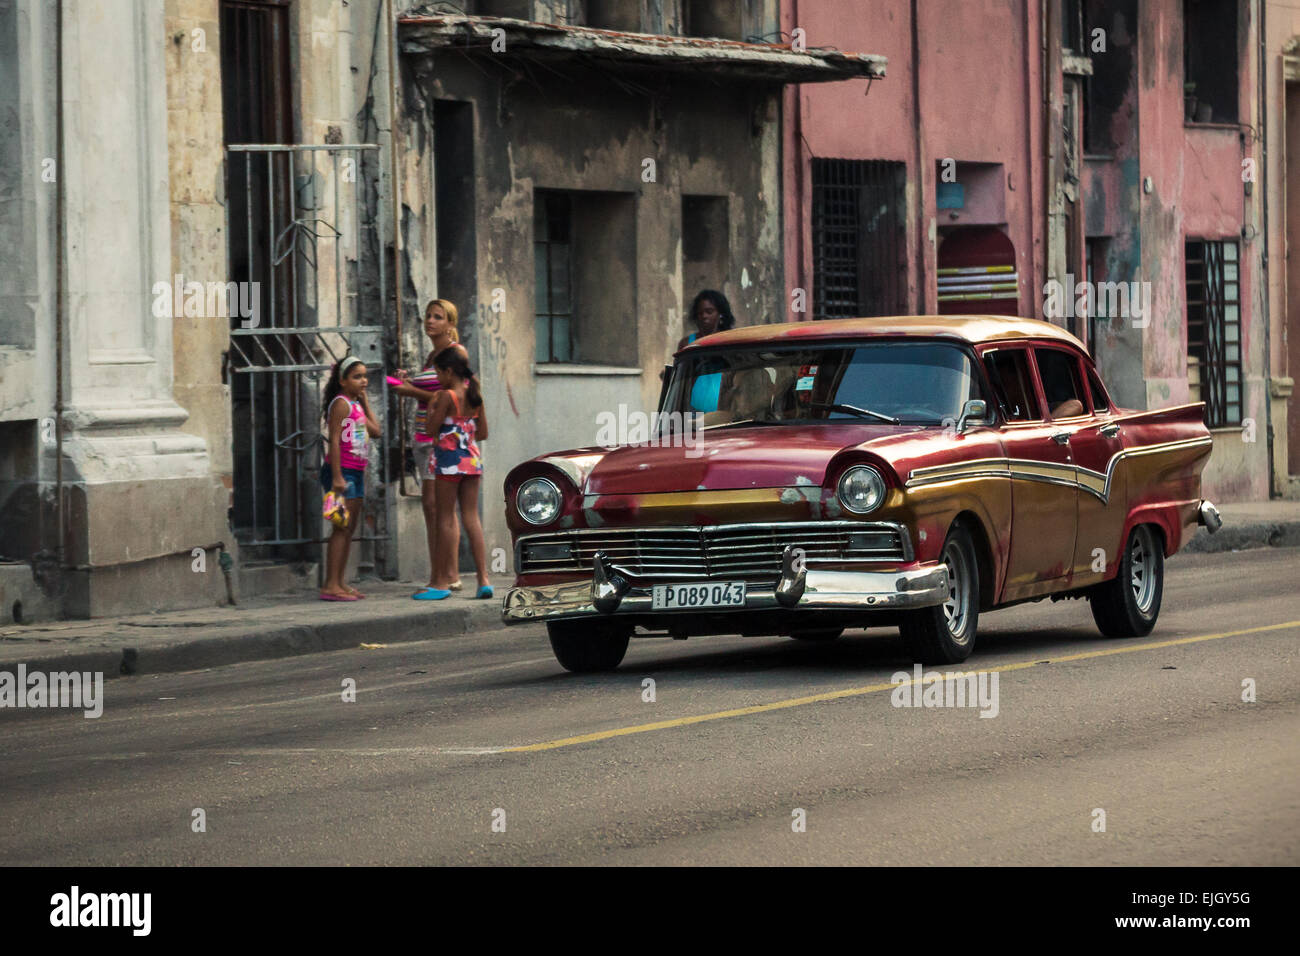 Classical car on the streets of Havana. Stock Photo